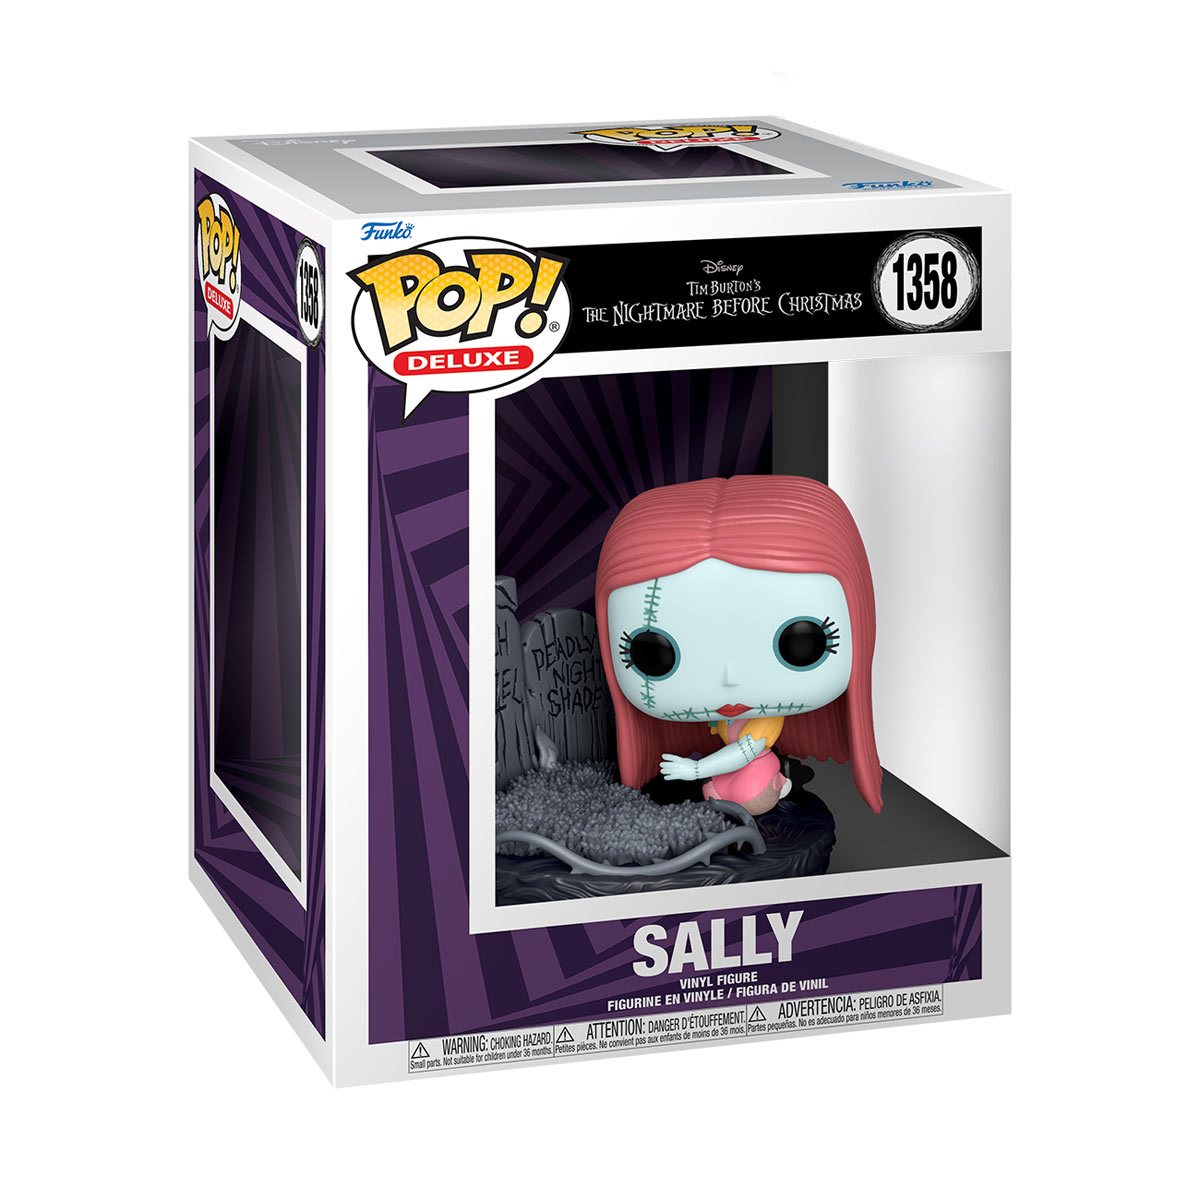 The Nightmare Before Christmas 30th Anniversary Sally with 